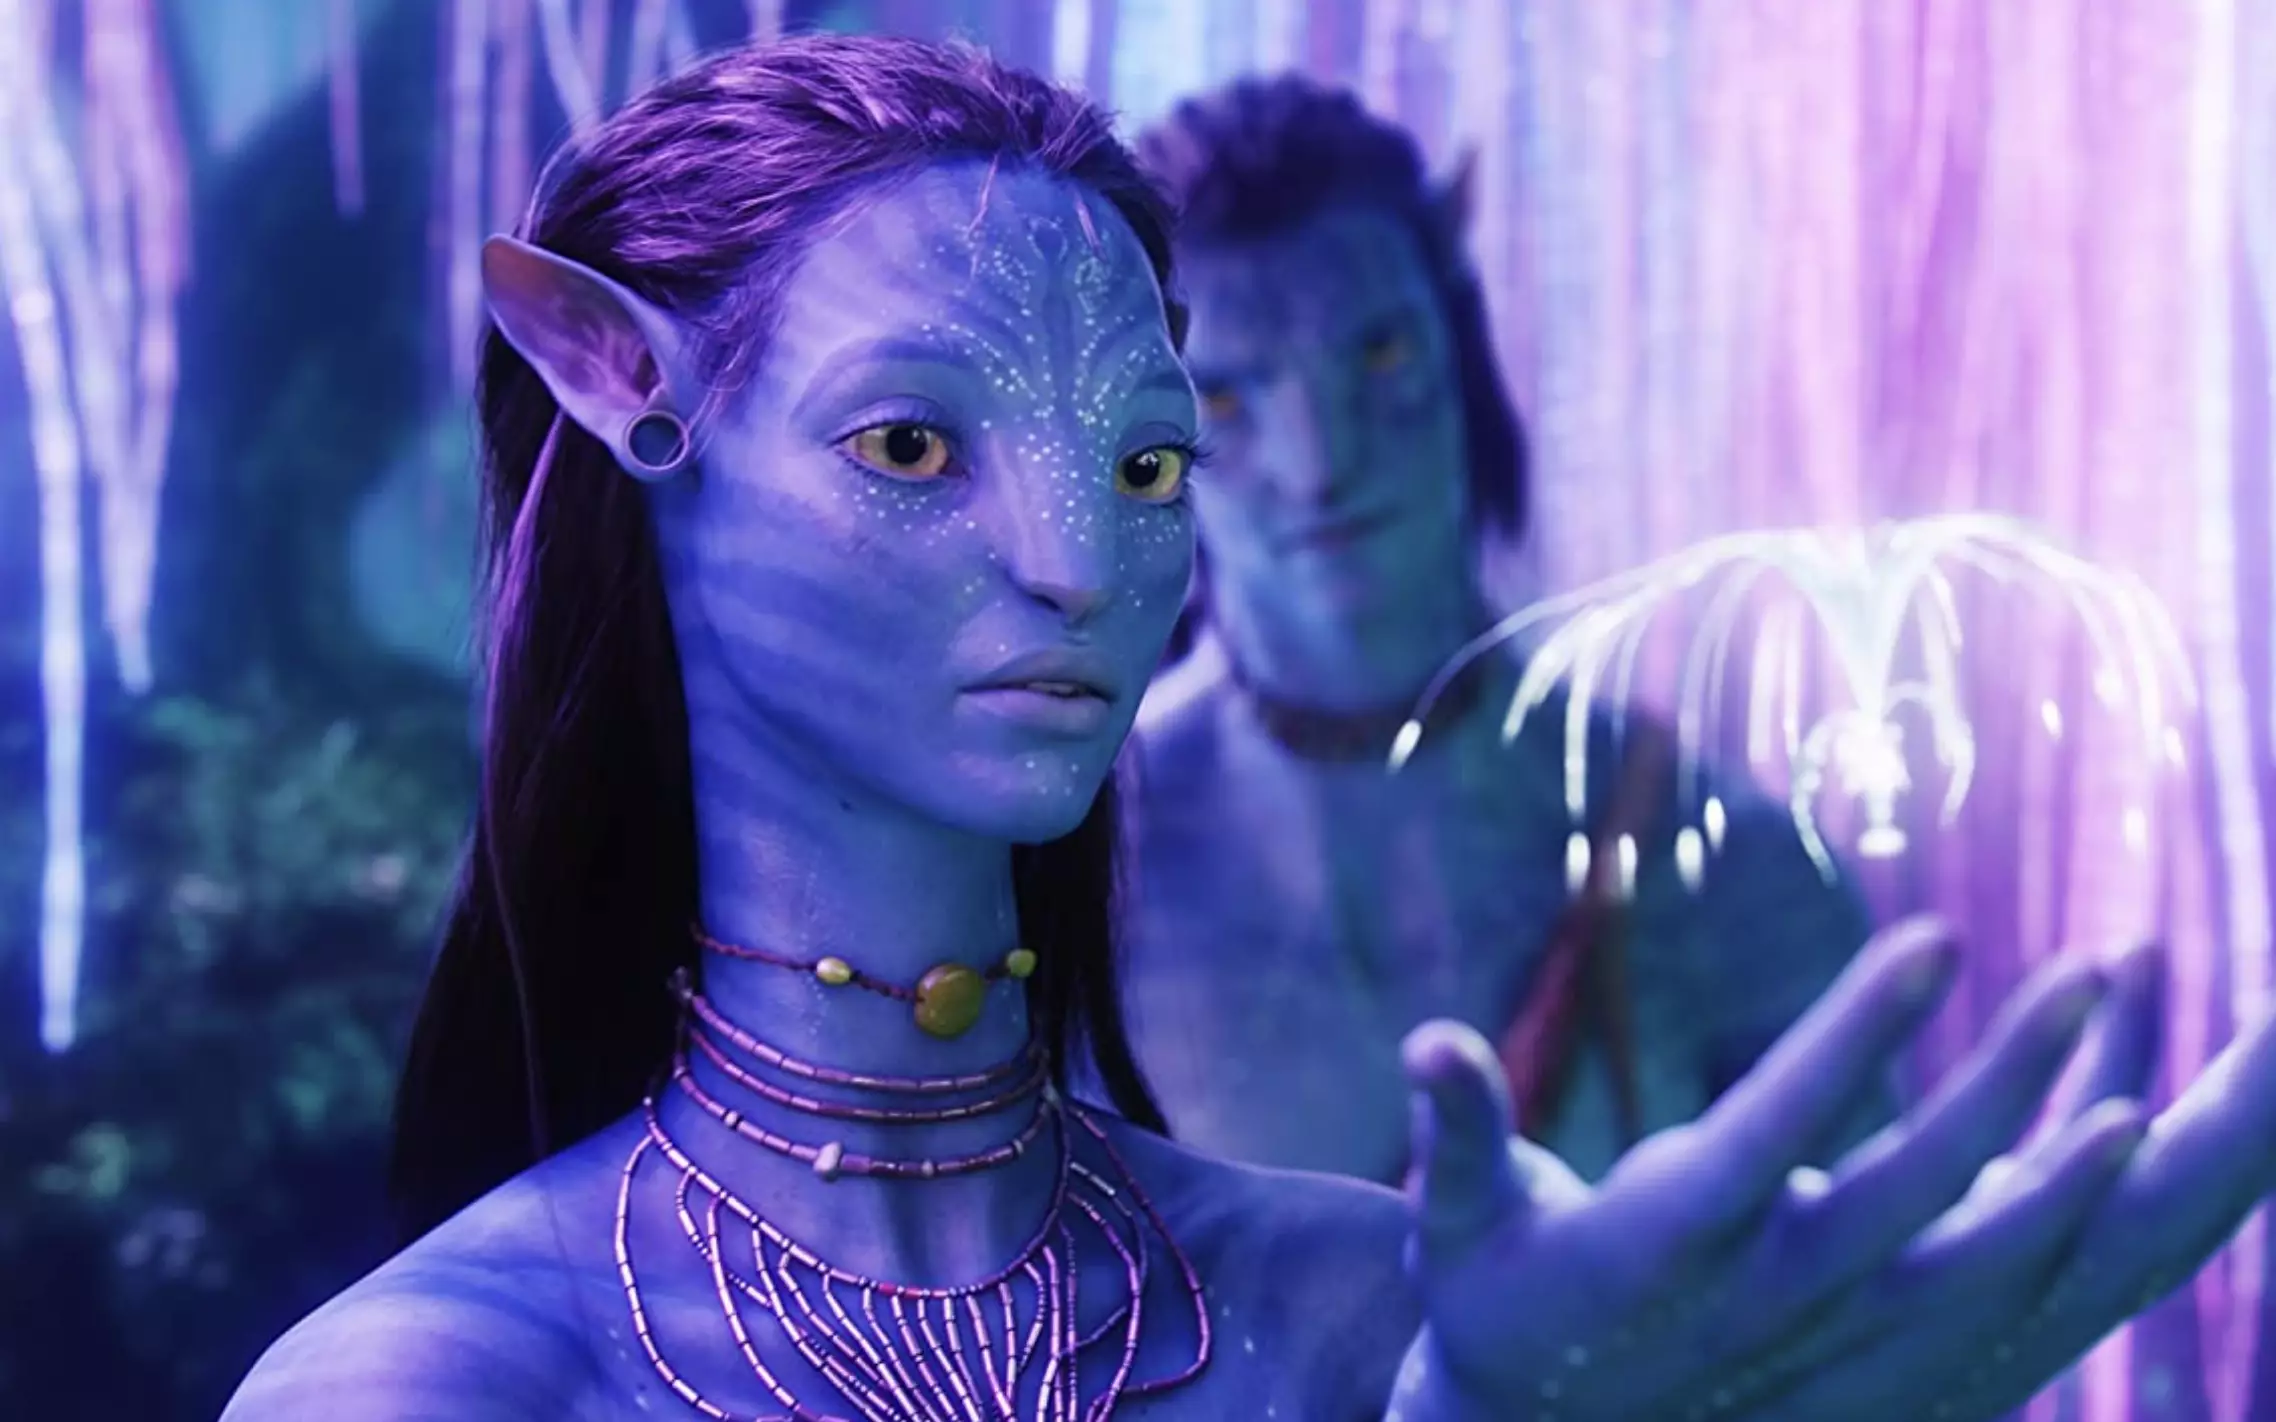 The first Avatar film came out all the way back in 2009 and continues to be a major global success.